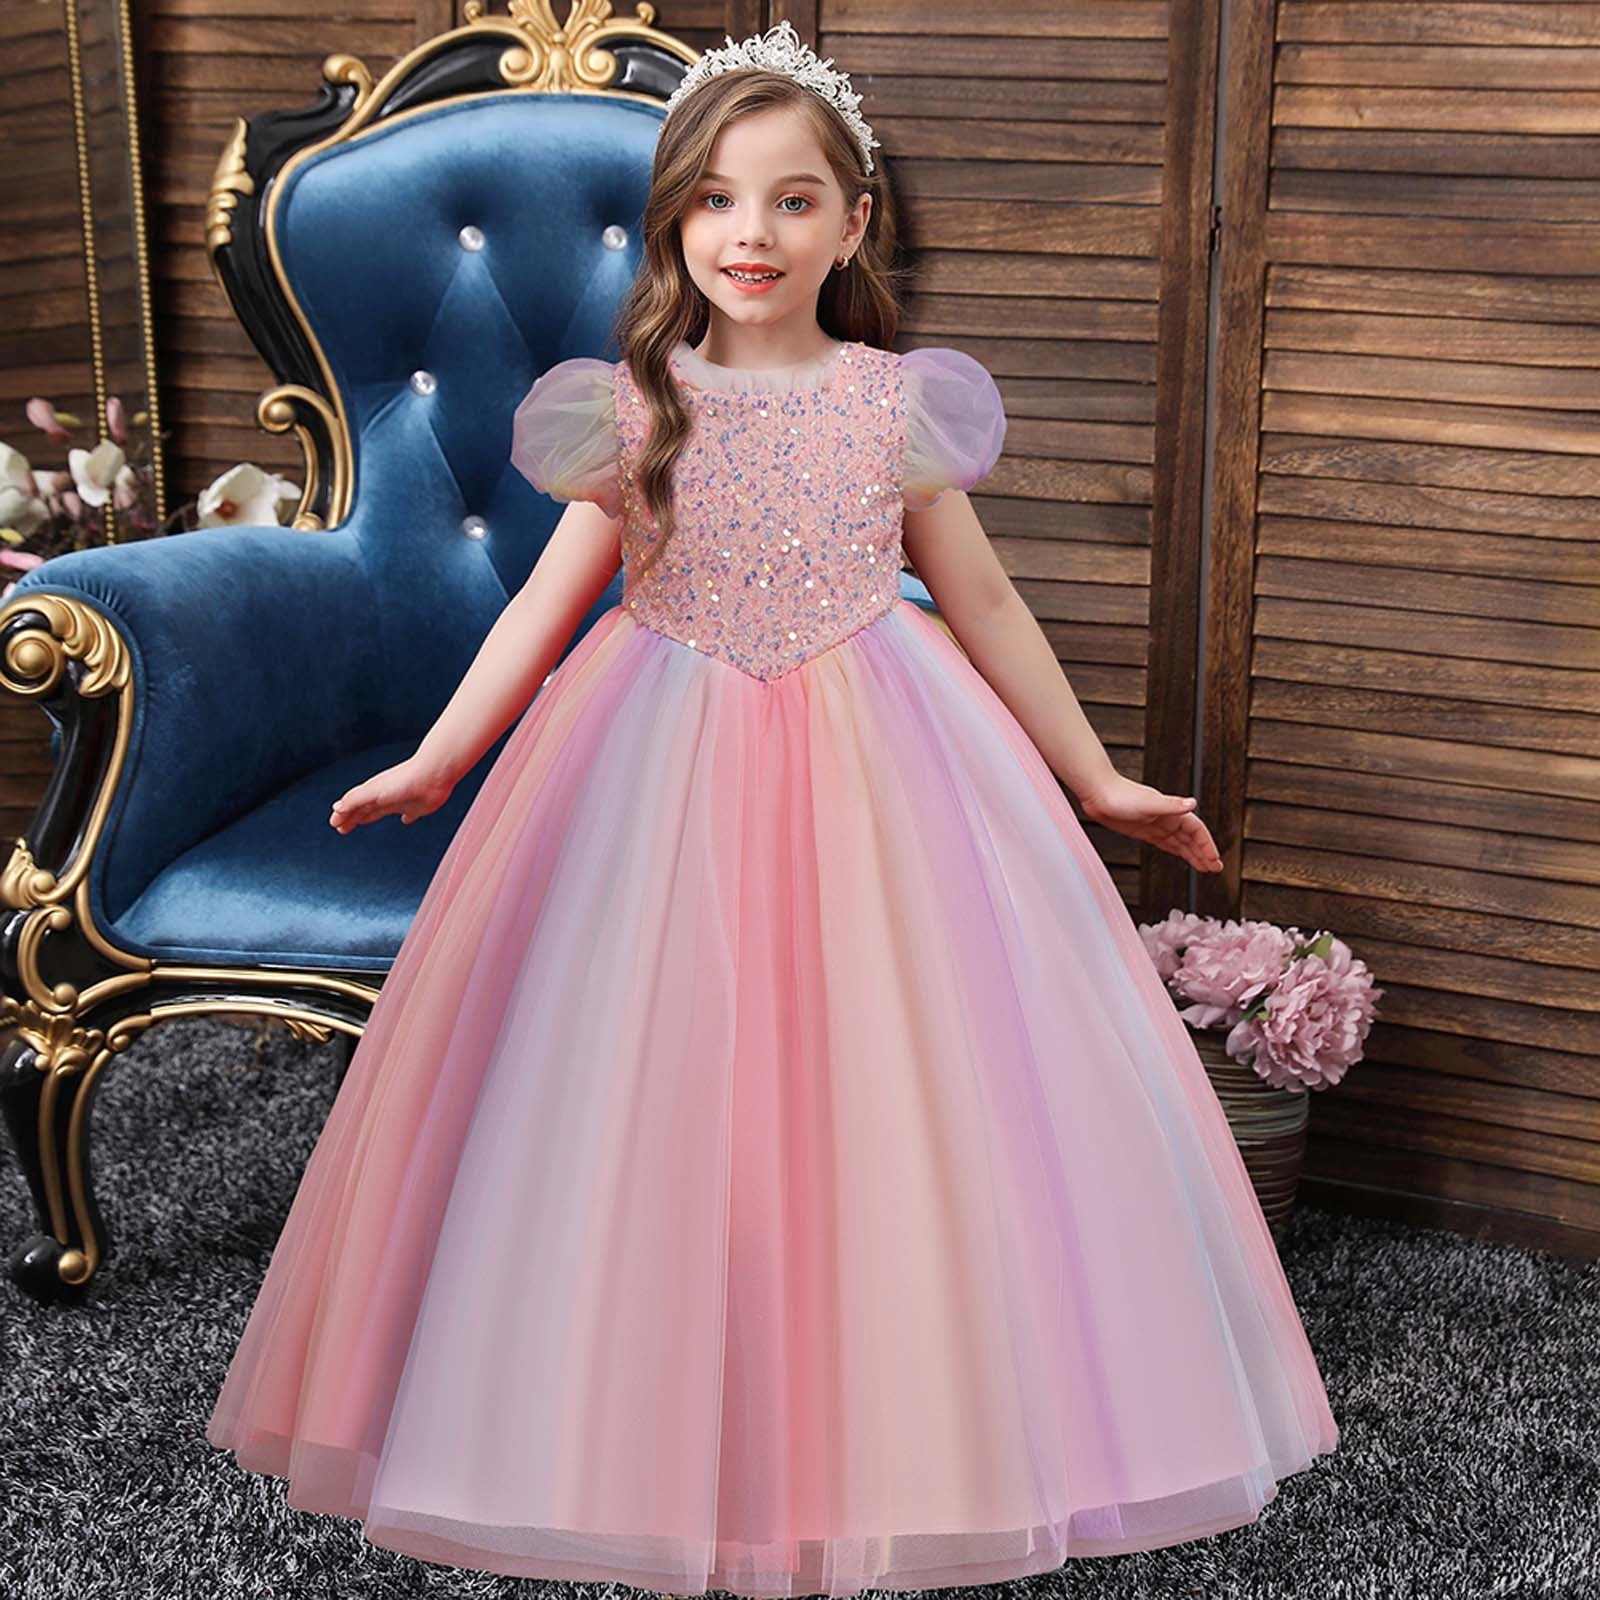 Buy 4 YOU DRESSES Girl's Gown (PRINCESS 2022_Deep Pink_5 Years-6 Years) at  Amazon.in